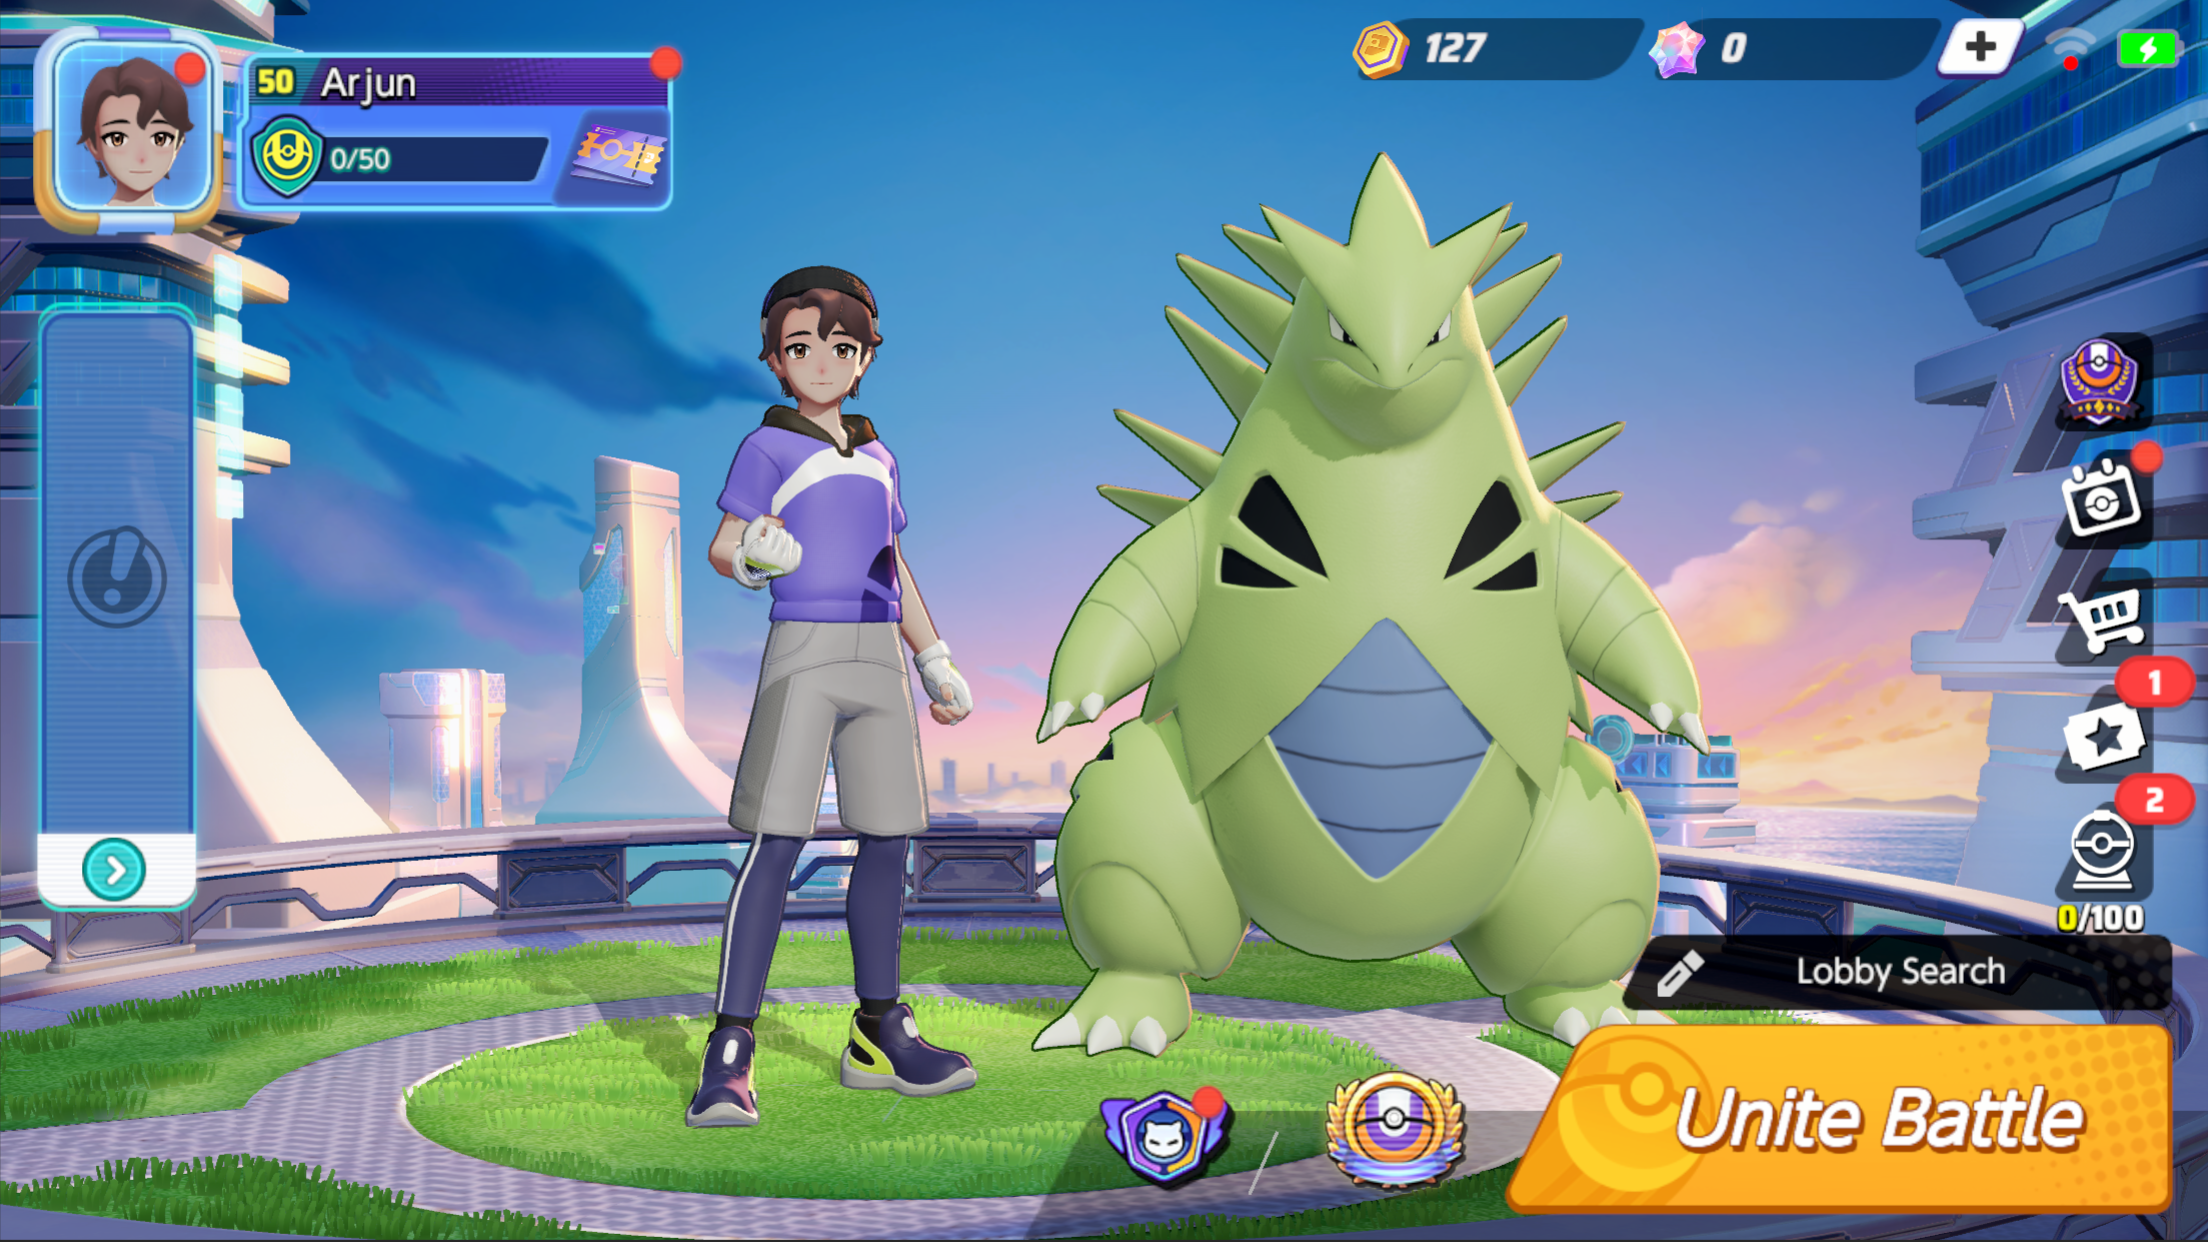 Pokemon Sword & Shield Mobile Download 🔥 Pokemon Sword and Shield Mobile  Gameplay iPhone/Android APK 